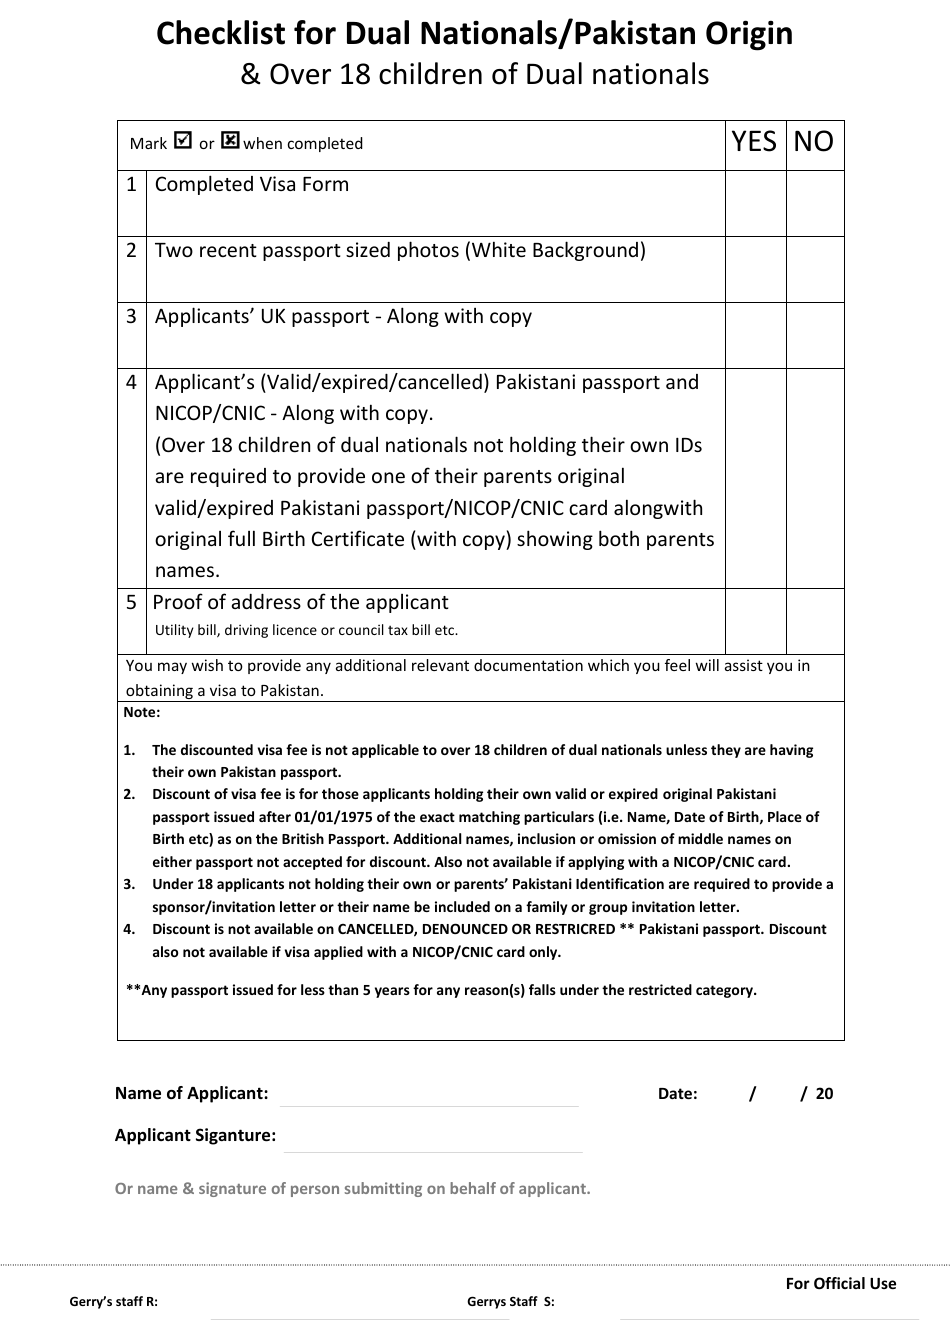 Checklist Template for Dual Nationals/Pakistan Origin  Over 18 Children of Dual Nationals, Page 1